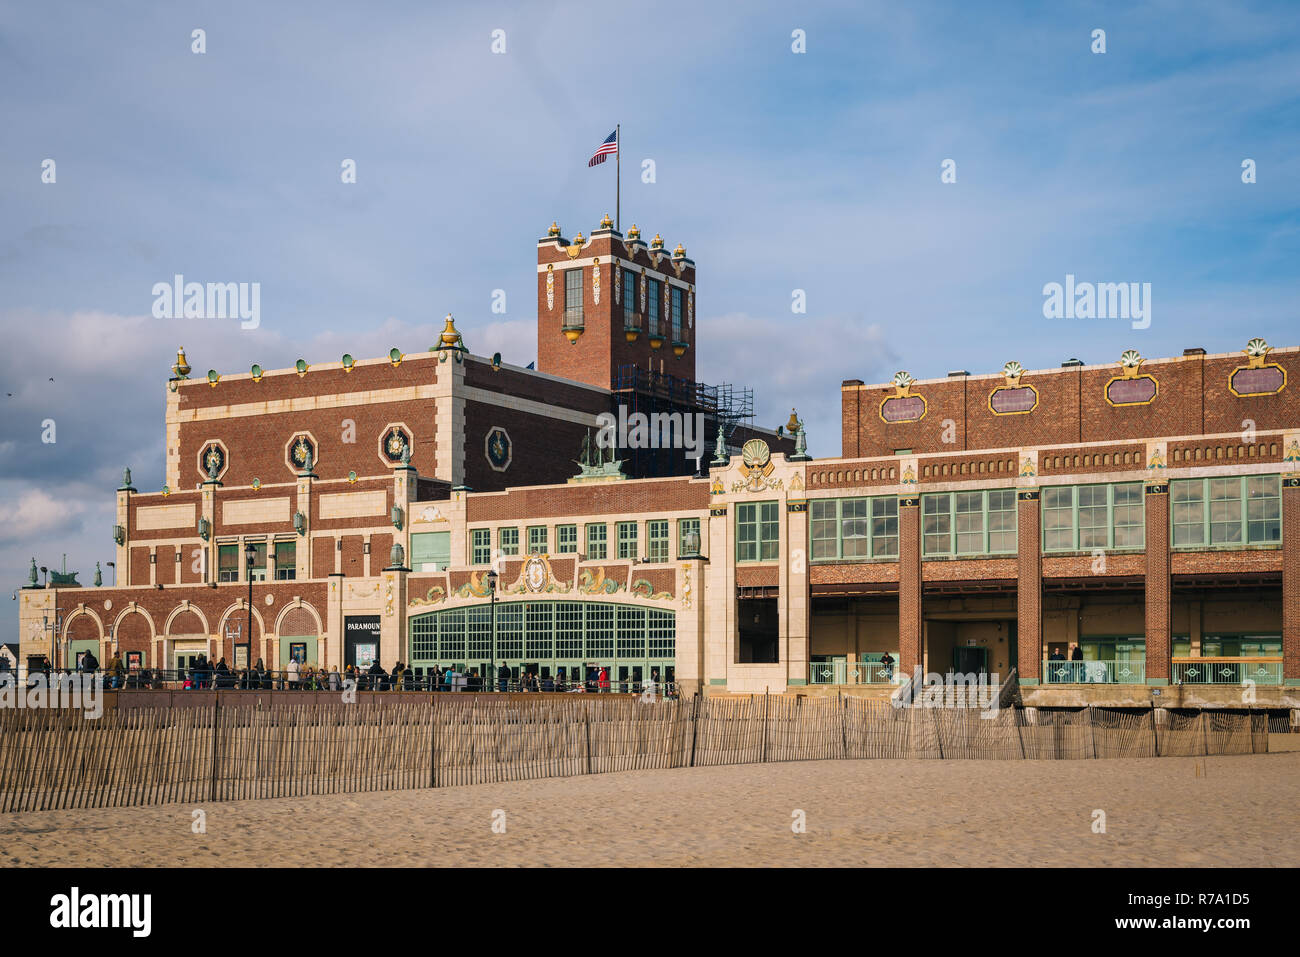 Die Convention Hall in Asbury Park, New Jersey. Stockfoto